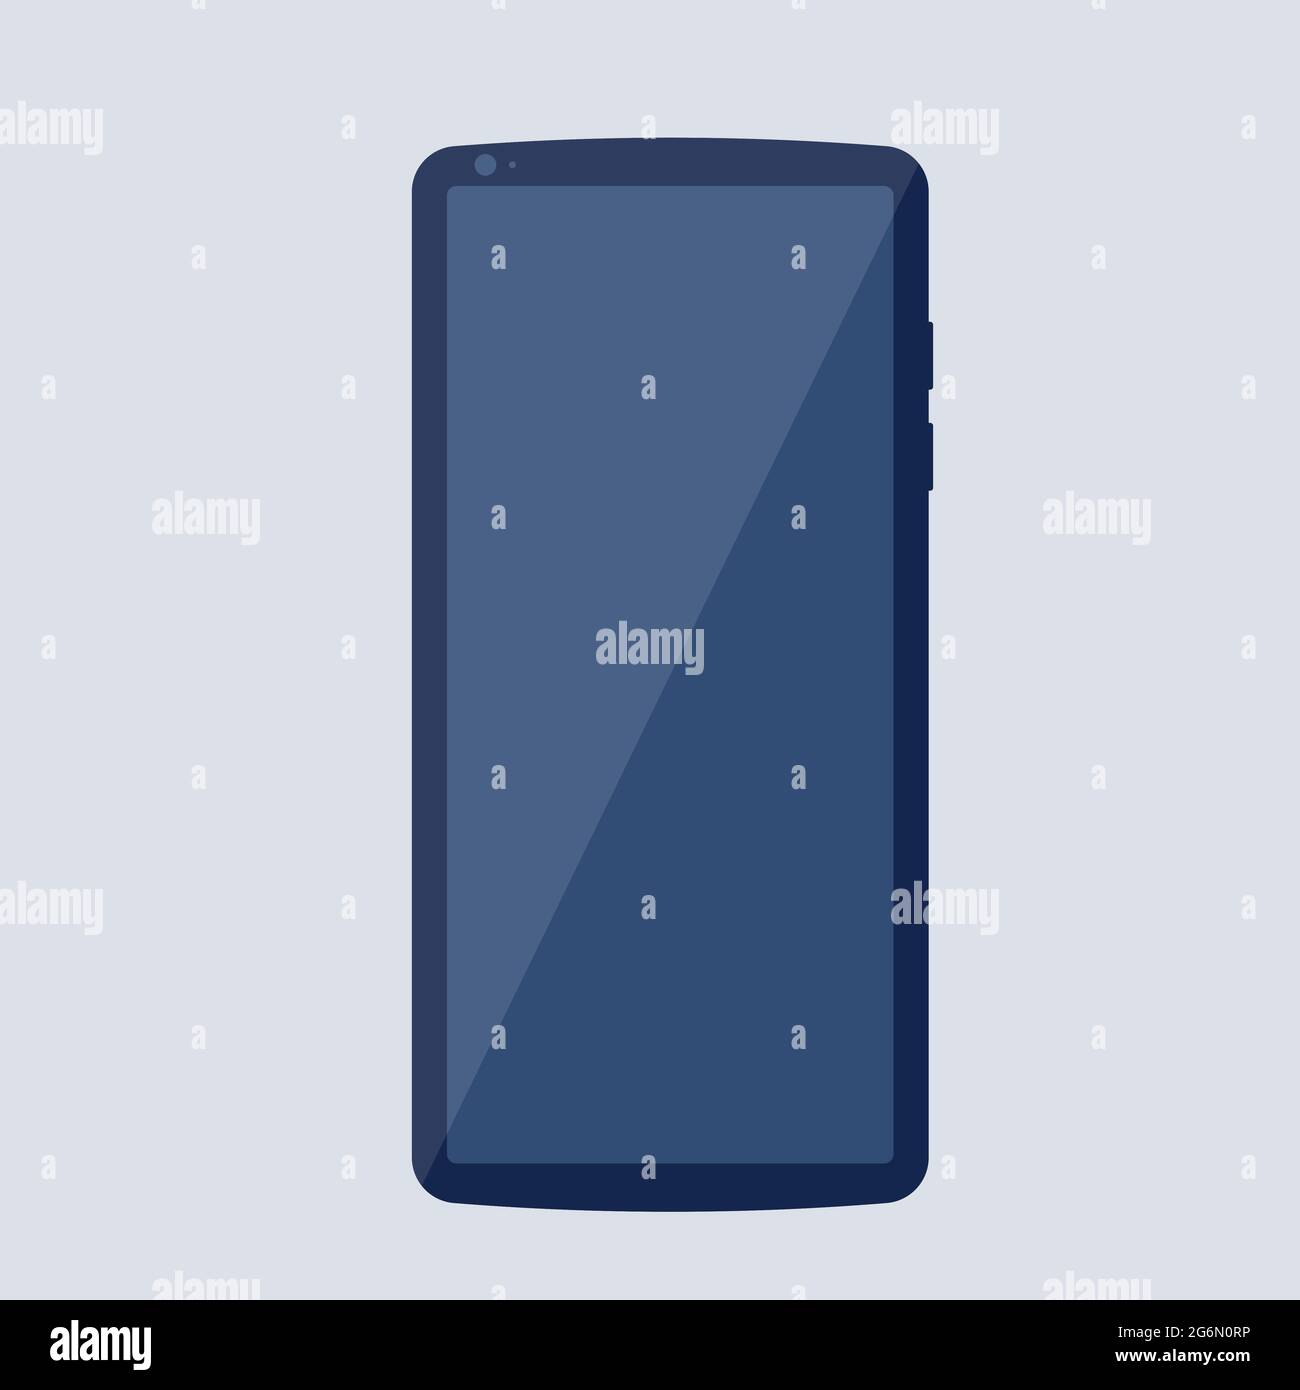 simple smartphone with blank screen vector illustration Stock Vector